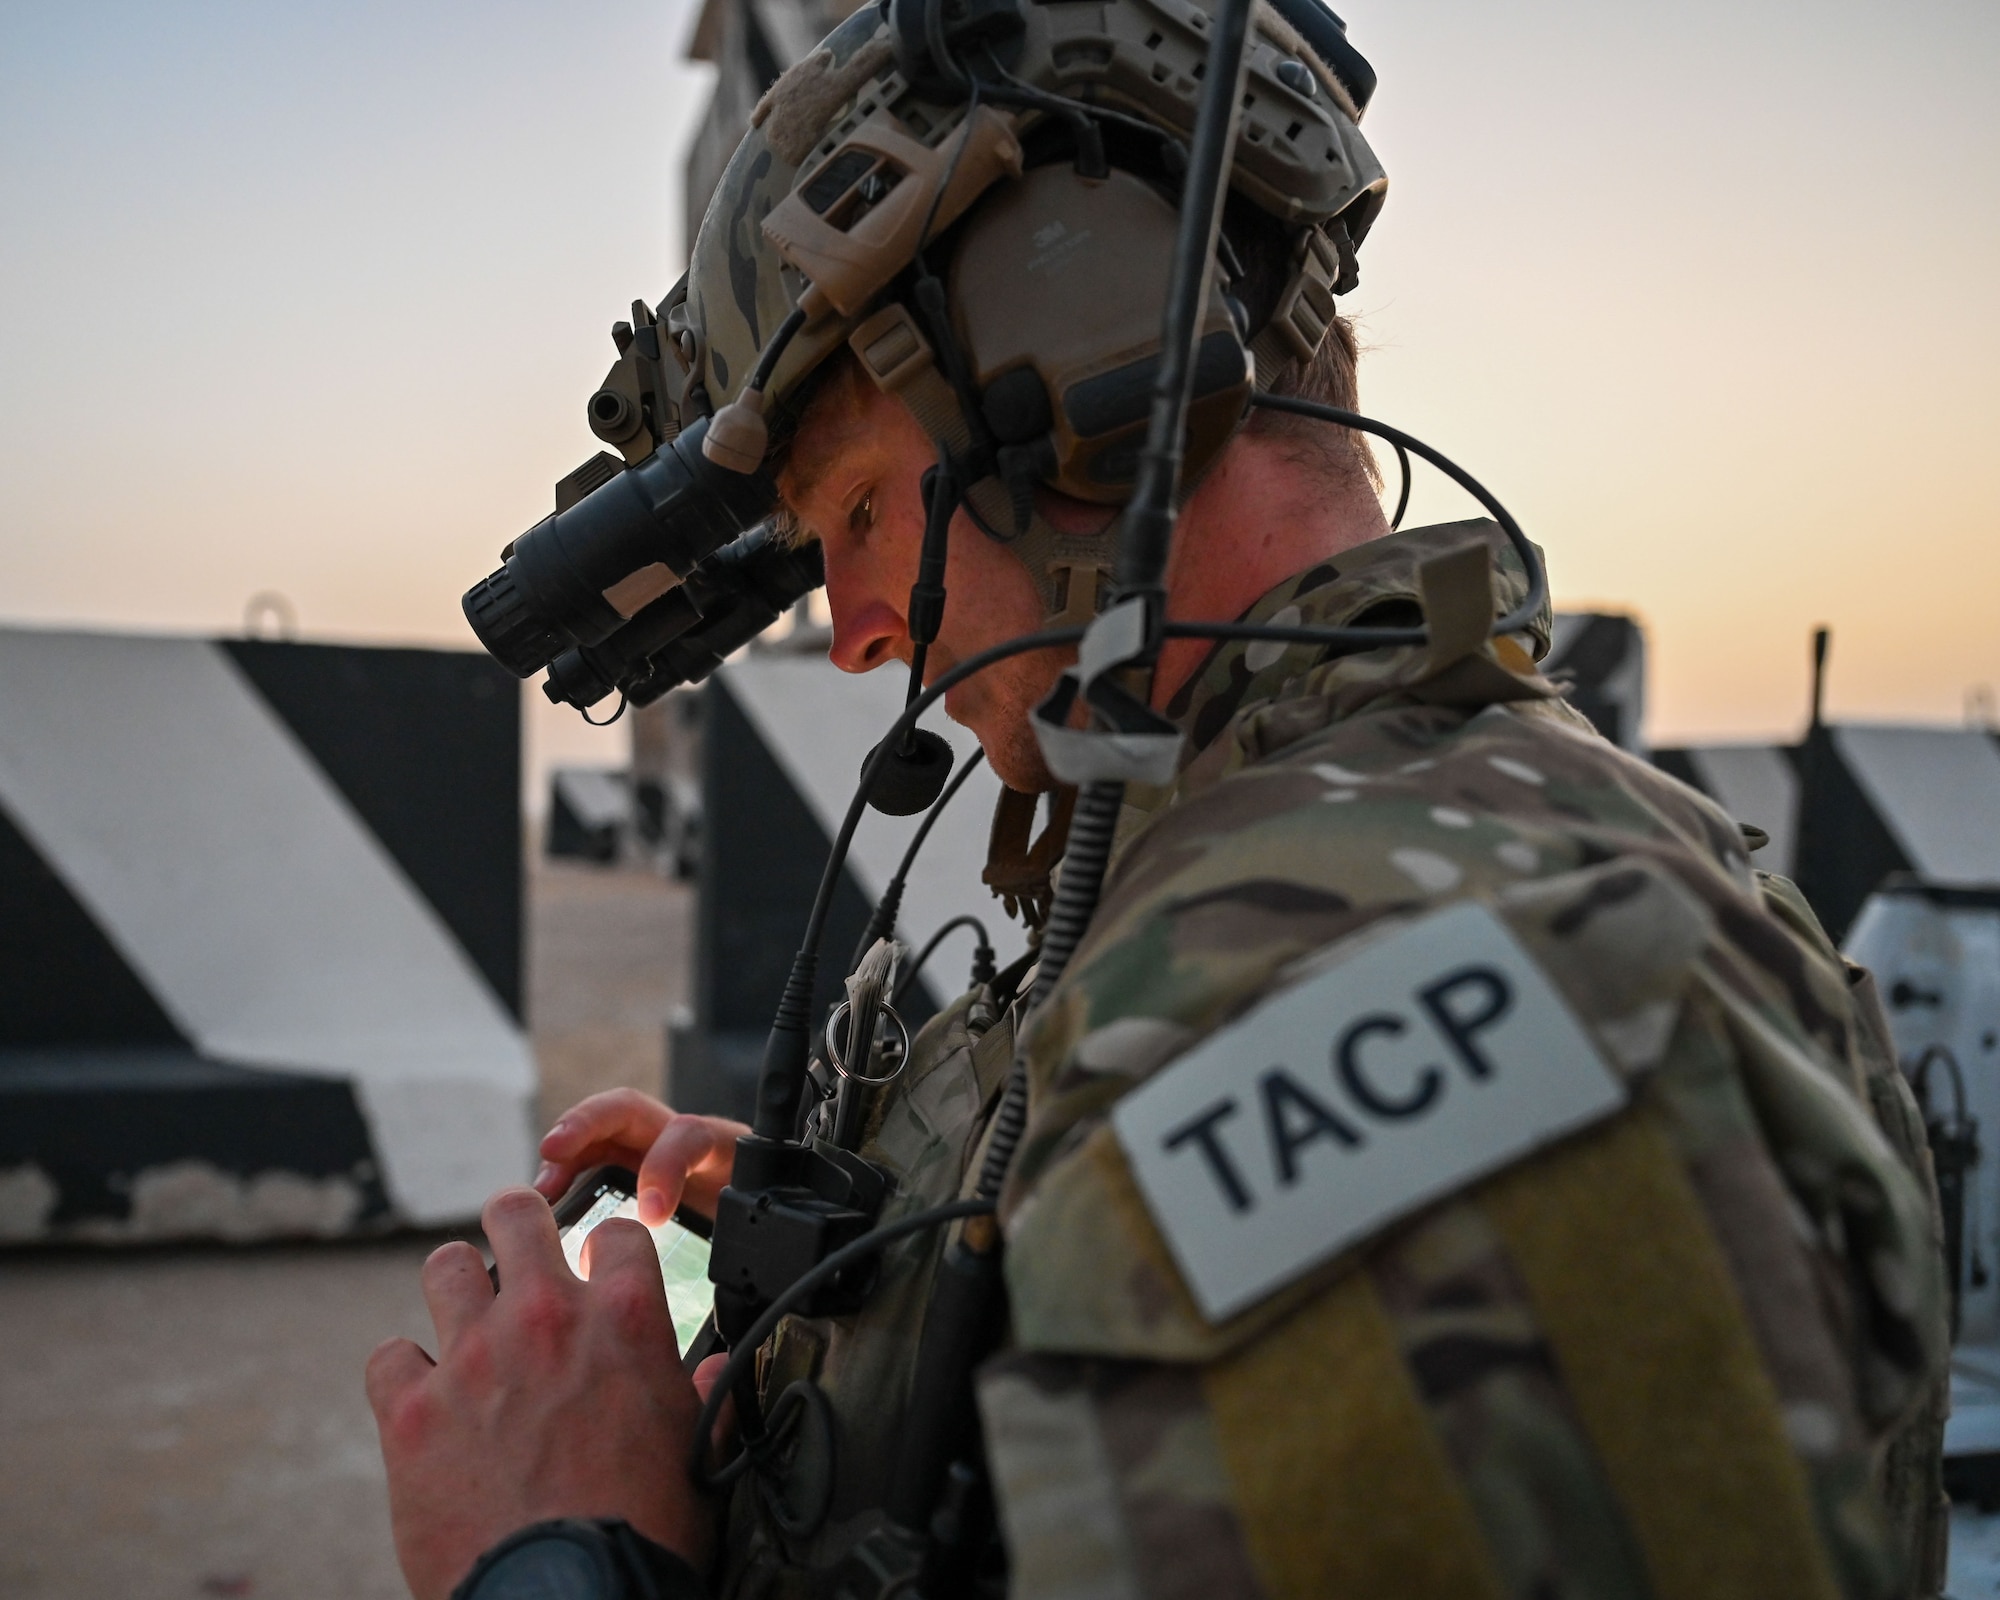 Tactical Air Control Party (TACP) Airmen from the 82nd Expeditionary Air Support Operations Squadron prepare for a large-scale exercise at Udairi Range, Kuwait, June 13, 2023. The exercise included U.S. Air Force fixed wing close air support aircraft, U.S. Army Apache helicopters, and Army mortars from a light infantry company. TACP Airmen are leading the way in representing the multi-capable airman concept as they are experts in multi-domain, joint operations, command and control, close air support, and surface to surface fires.